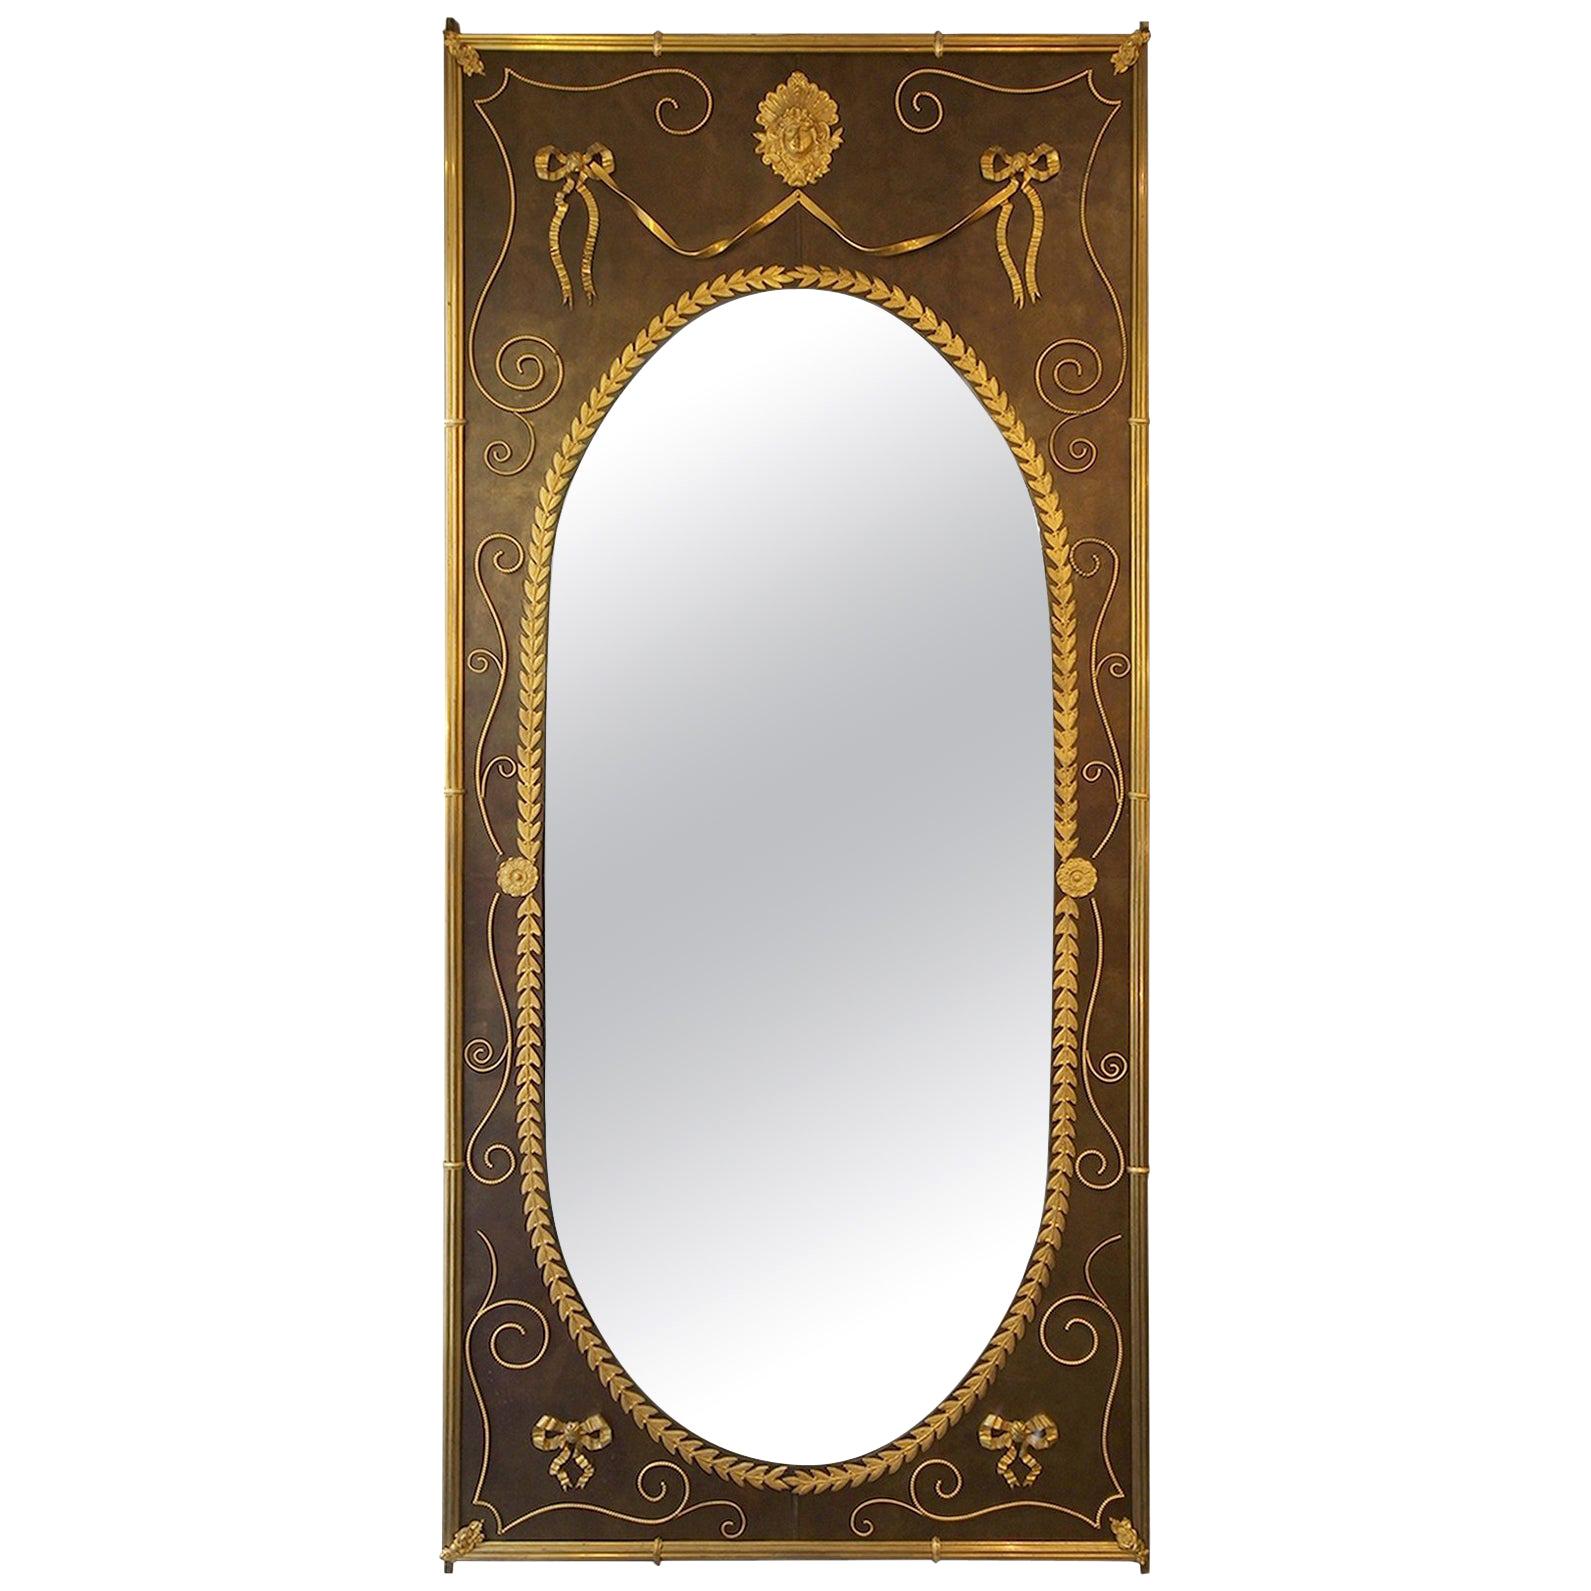 Rare and Spectacular Mirror in Louis XVI Style, France, circa 1880